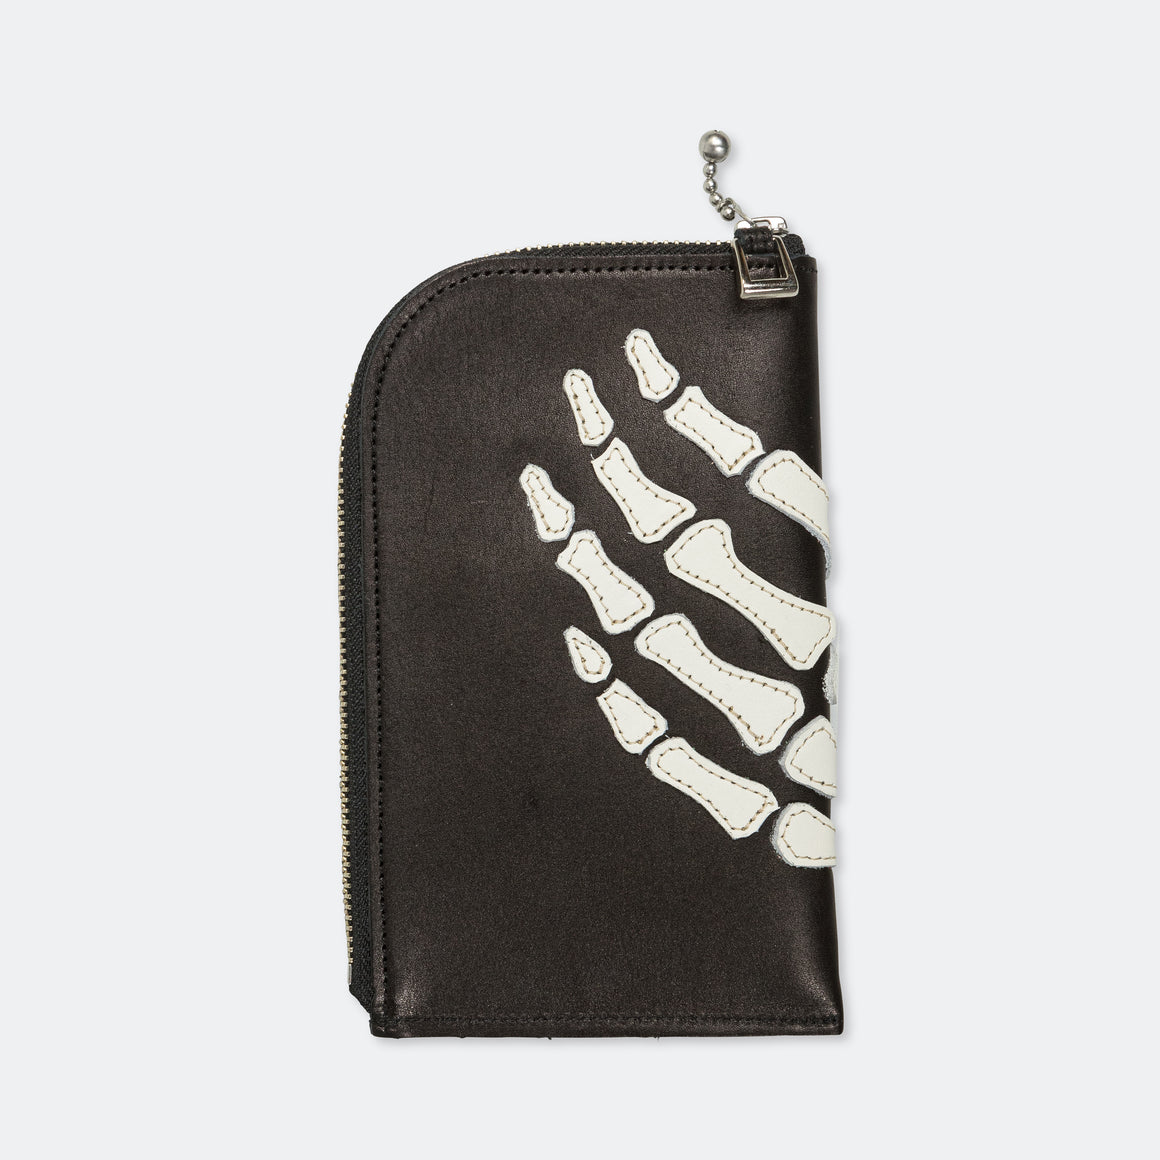 Leather THUMBS-UP BONE HAND ZIP Neck Pouch - Black